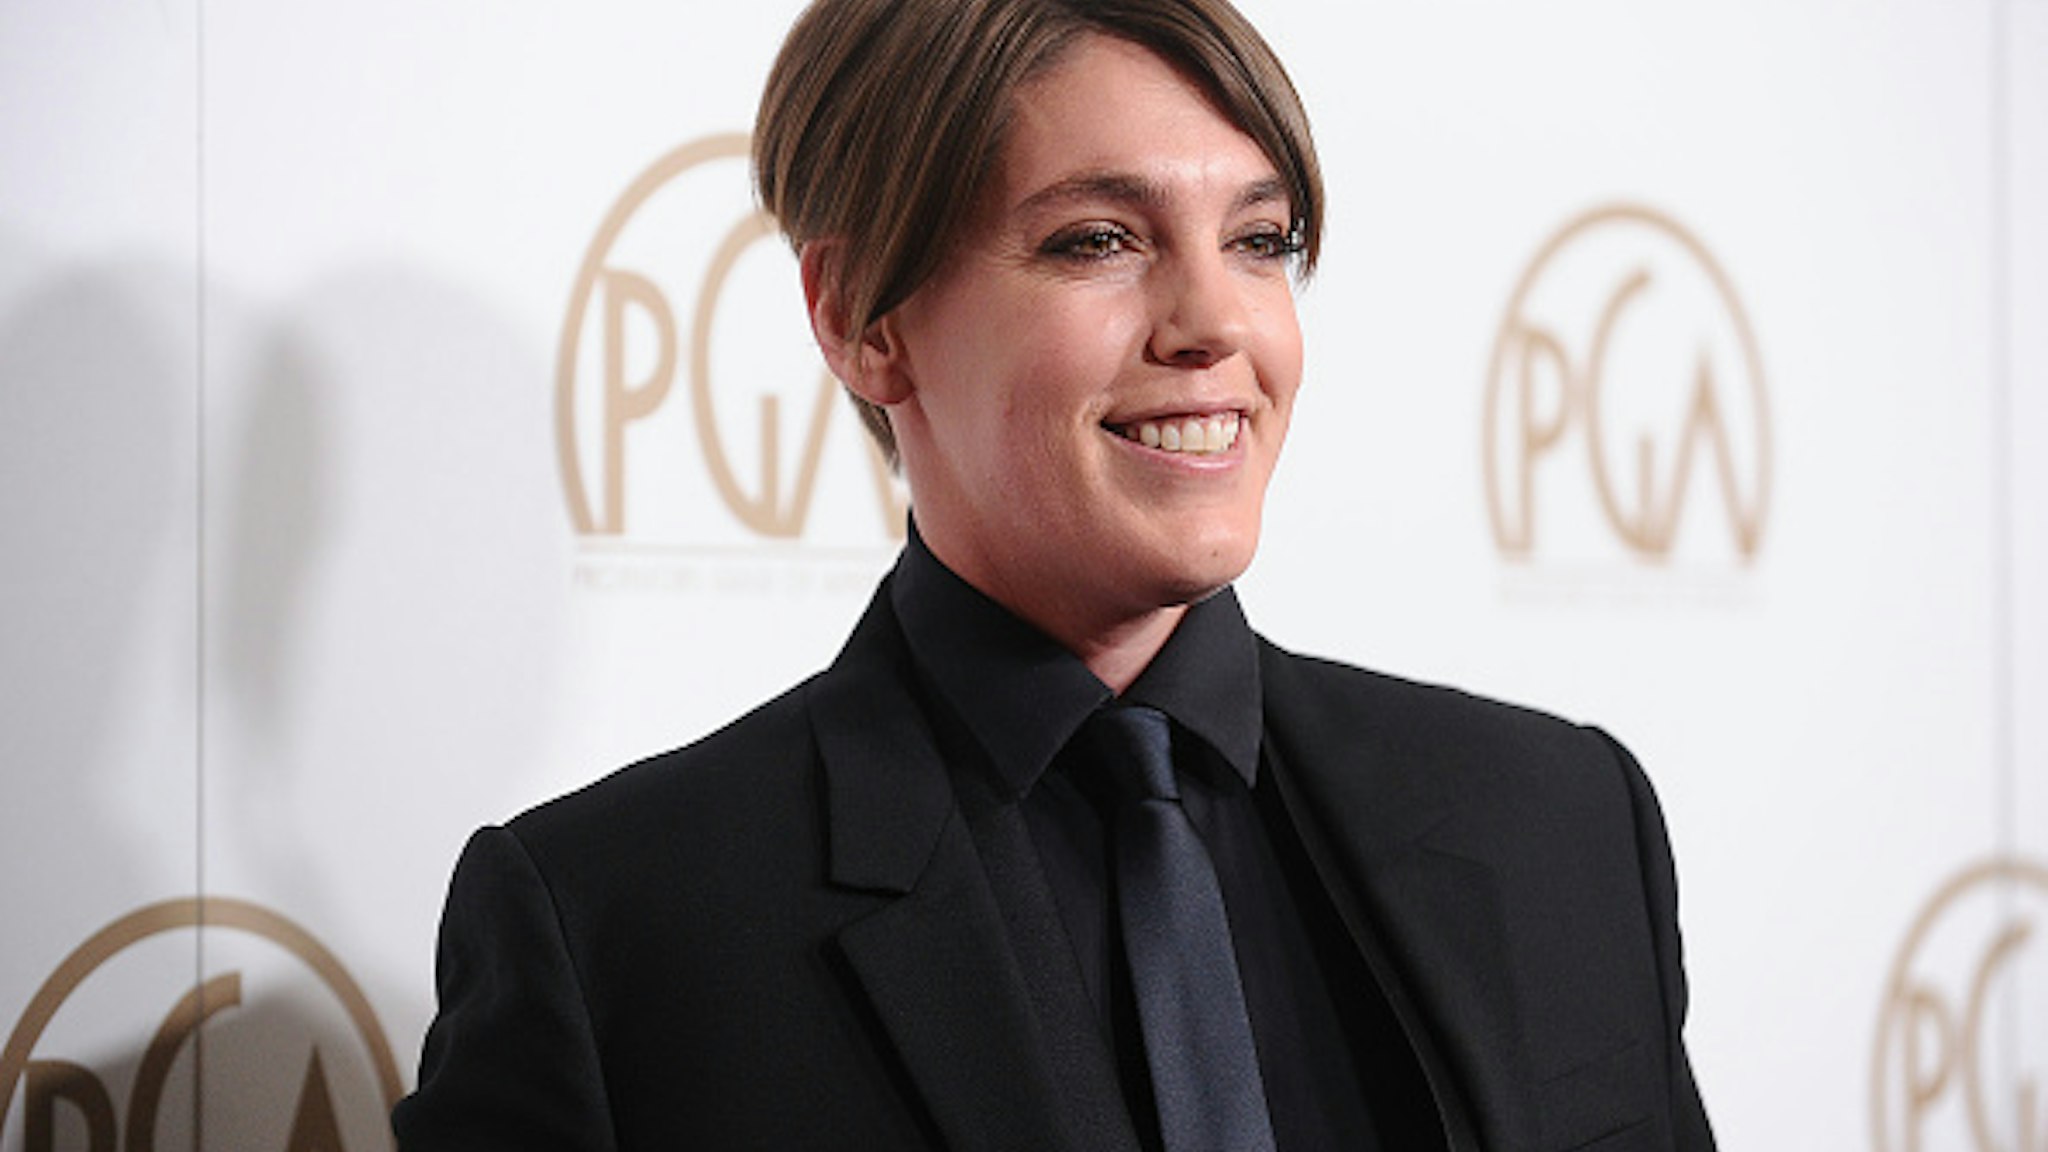 BEVERLY HILLS, CA - JANUARY 28: Producer Megan Ellison attends the 28th annual Producers Guild Awards at The Beverly Hilton Hotel on January 28, 2017 in Beverly Hills, California.